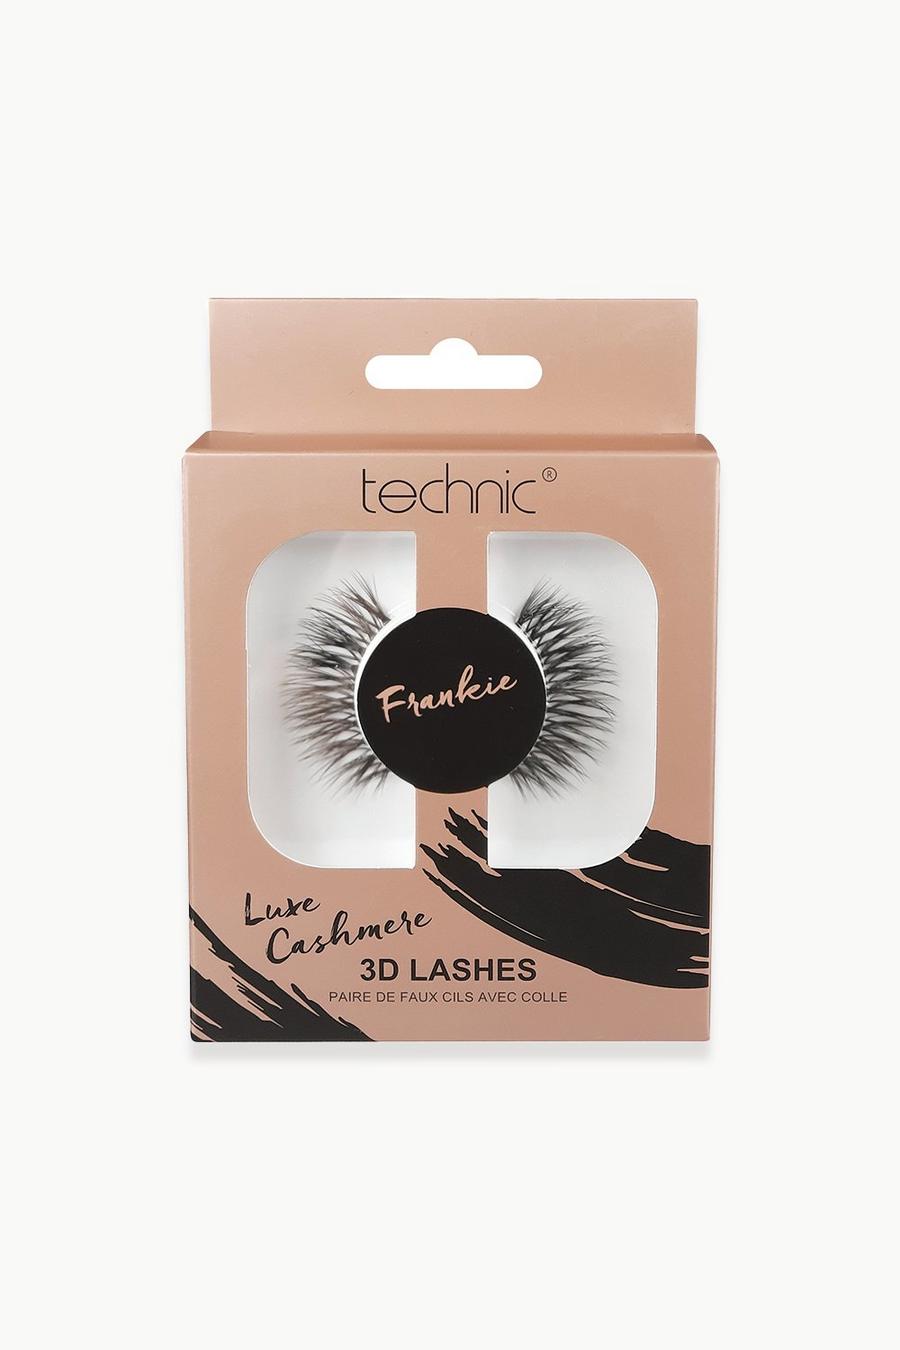 Technic Luxe Cashmere Wimpern - Frankie, Black image number 1